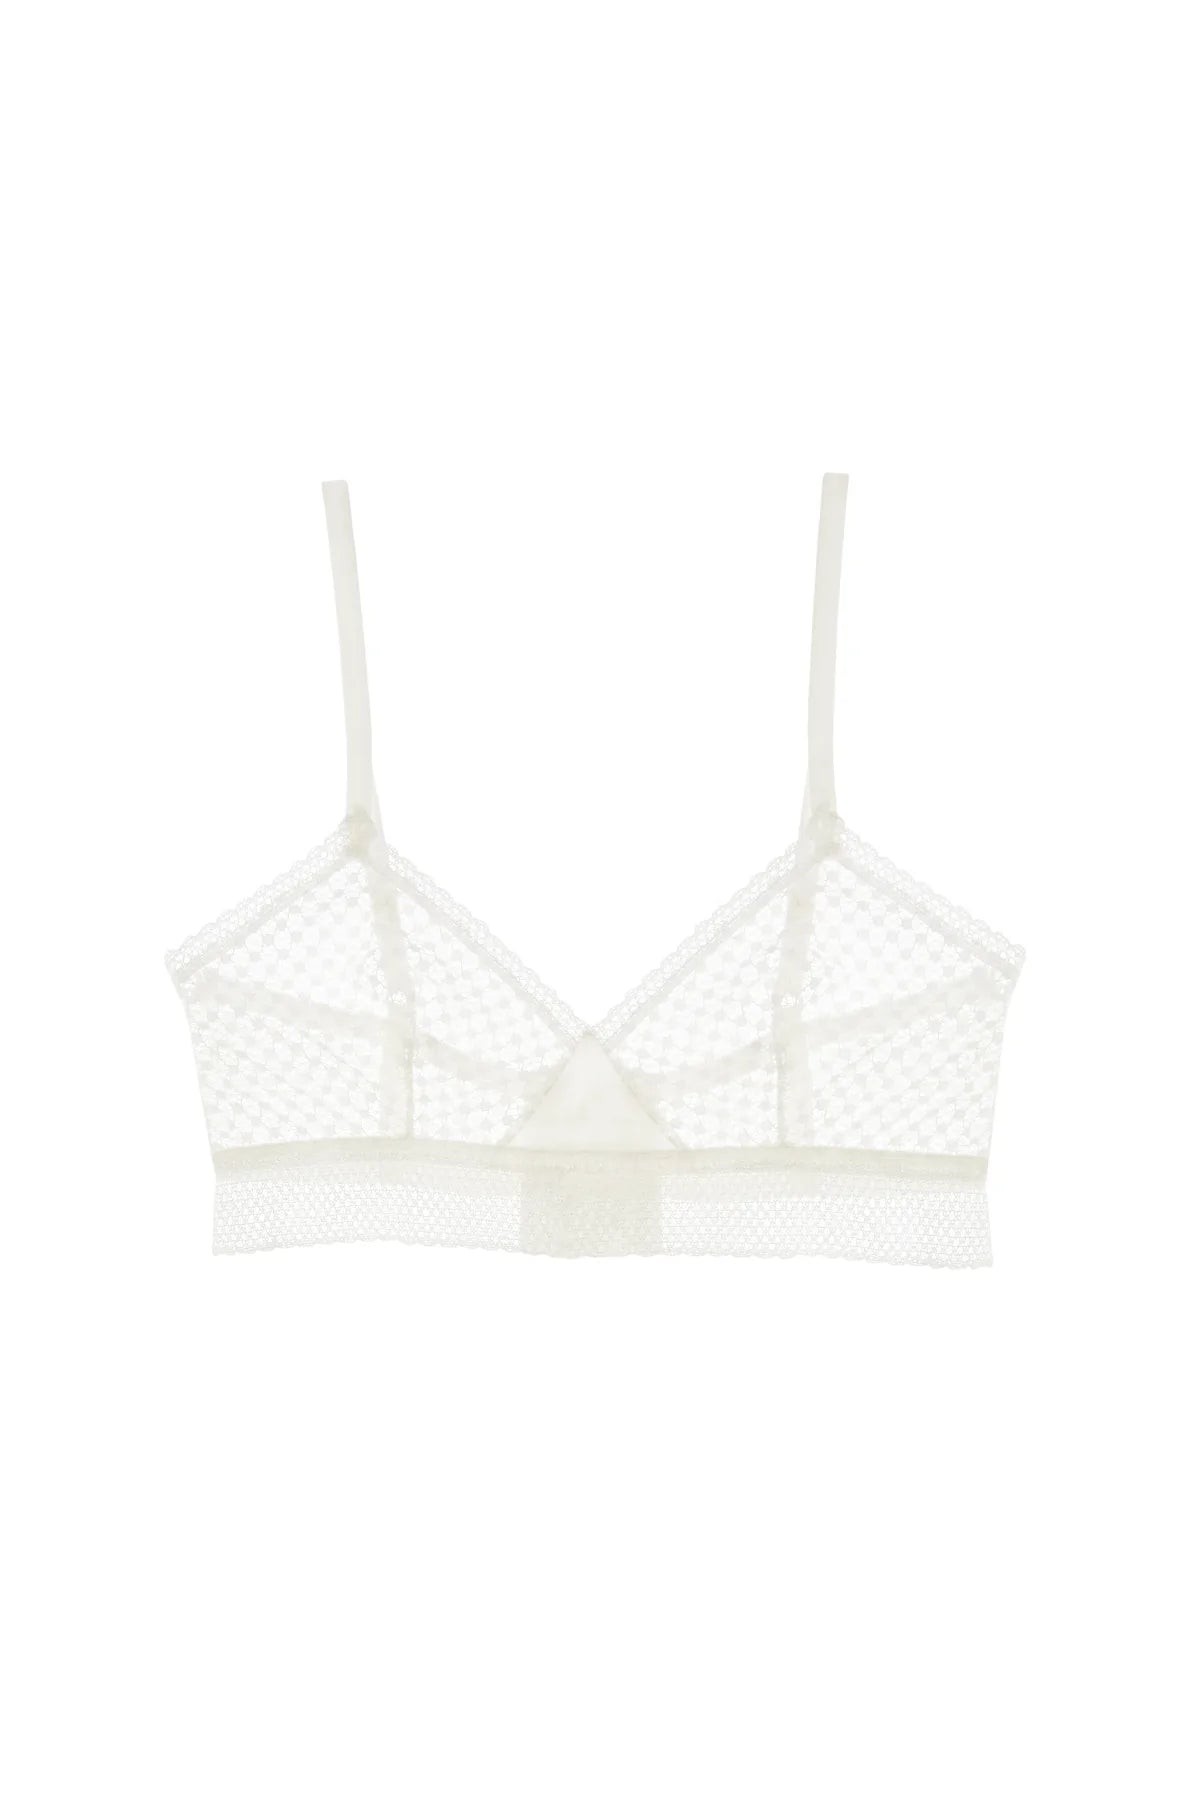 Love stands up for what's right - LONGLINE TRIANGLE BRA